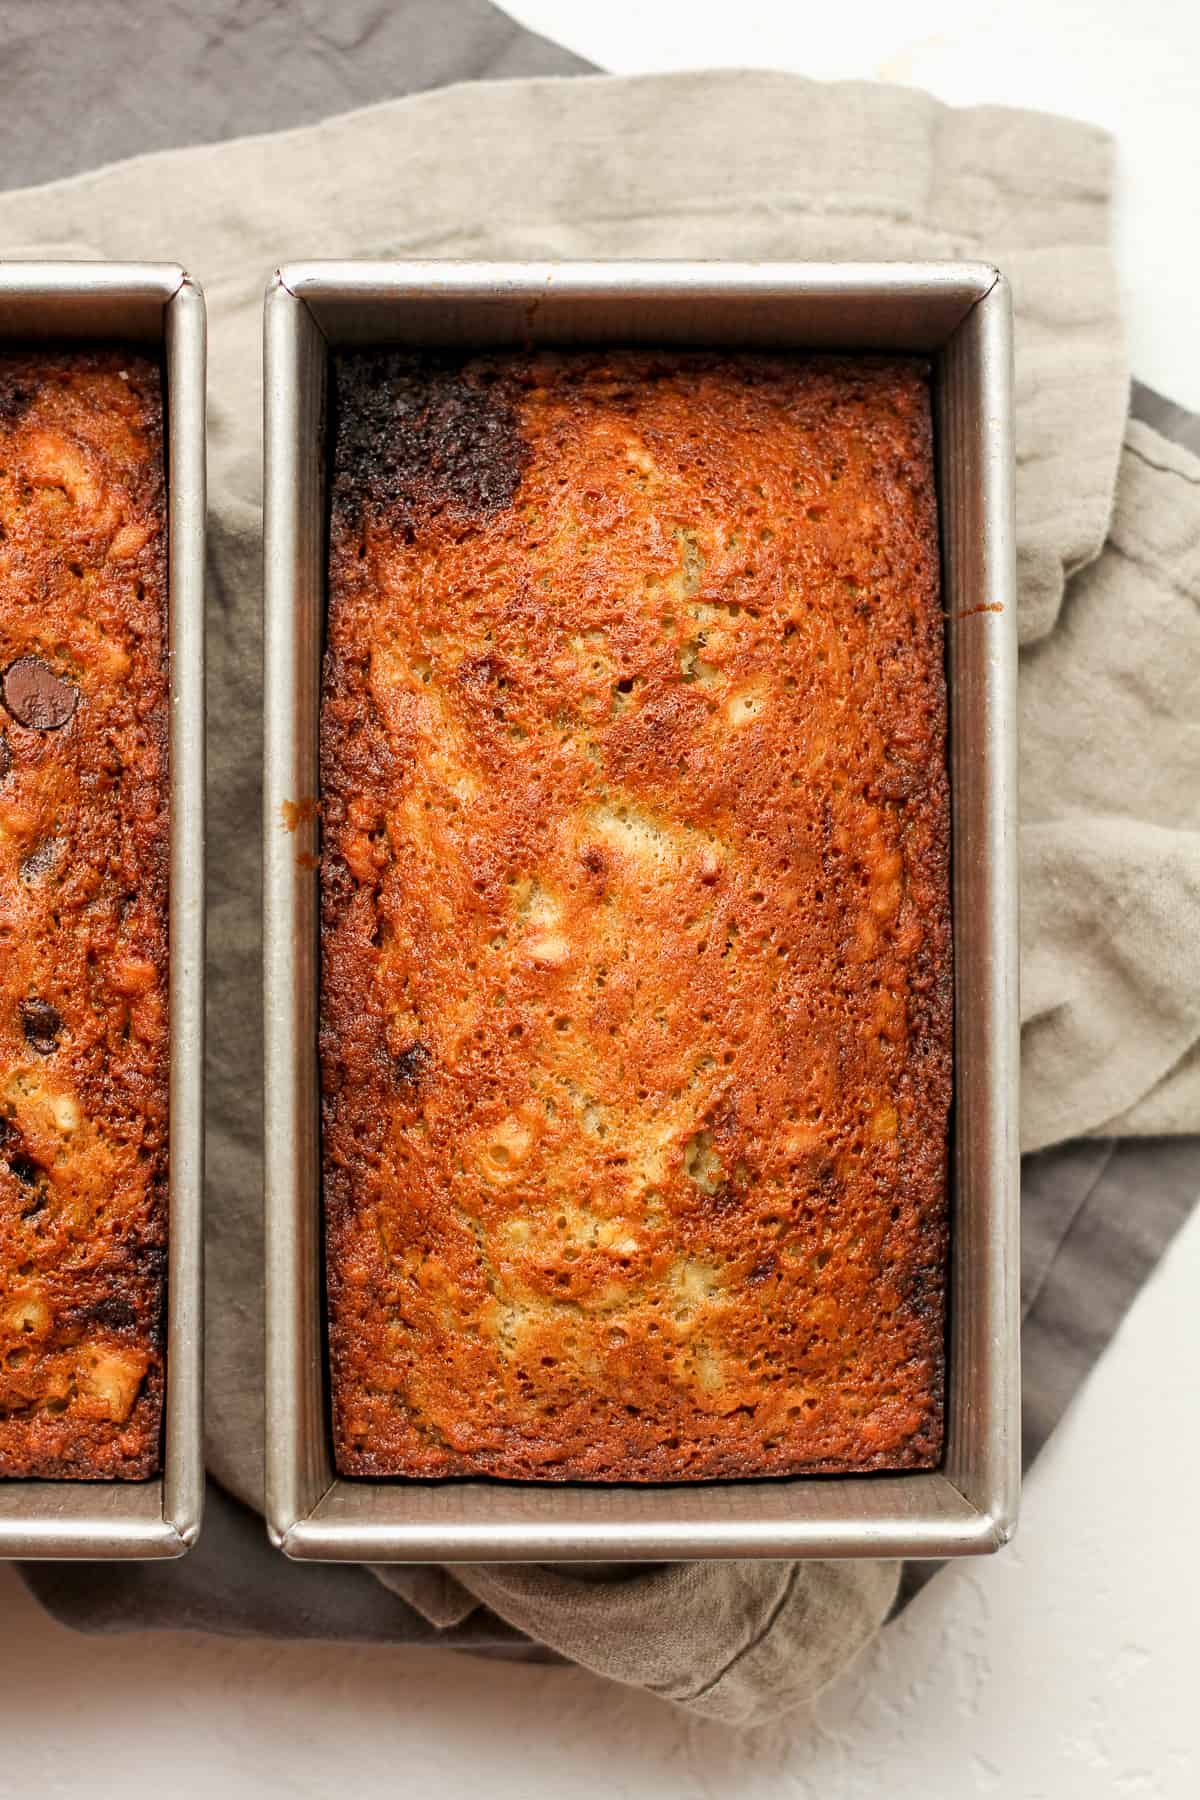 A pan of the banana bread without chocolate chips.